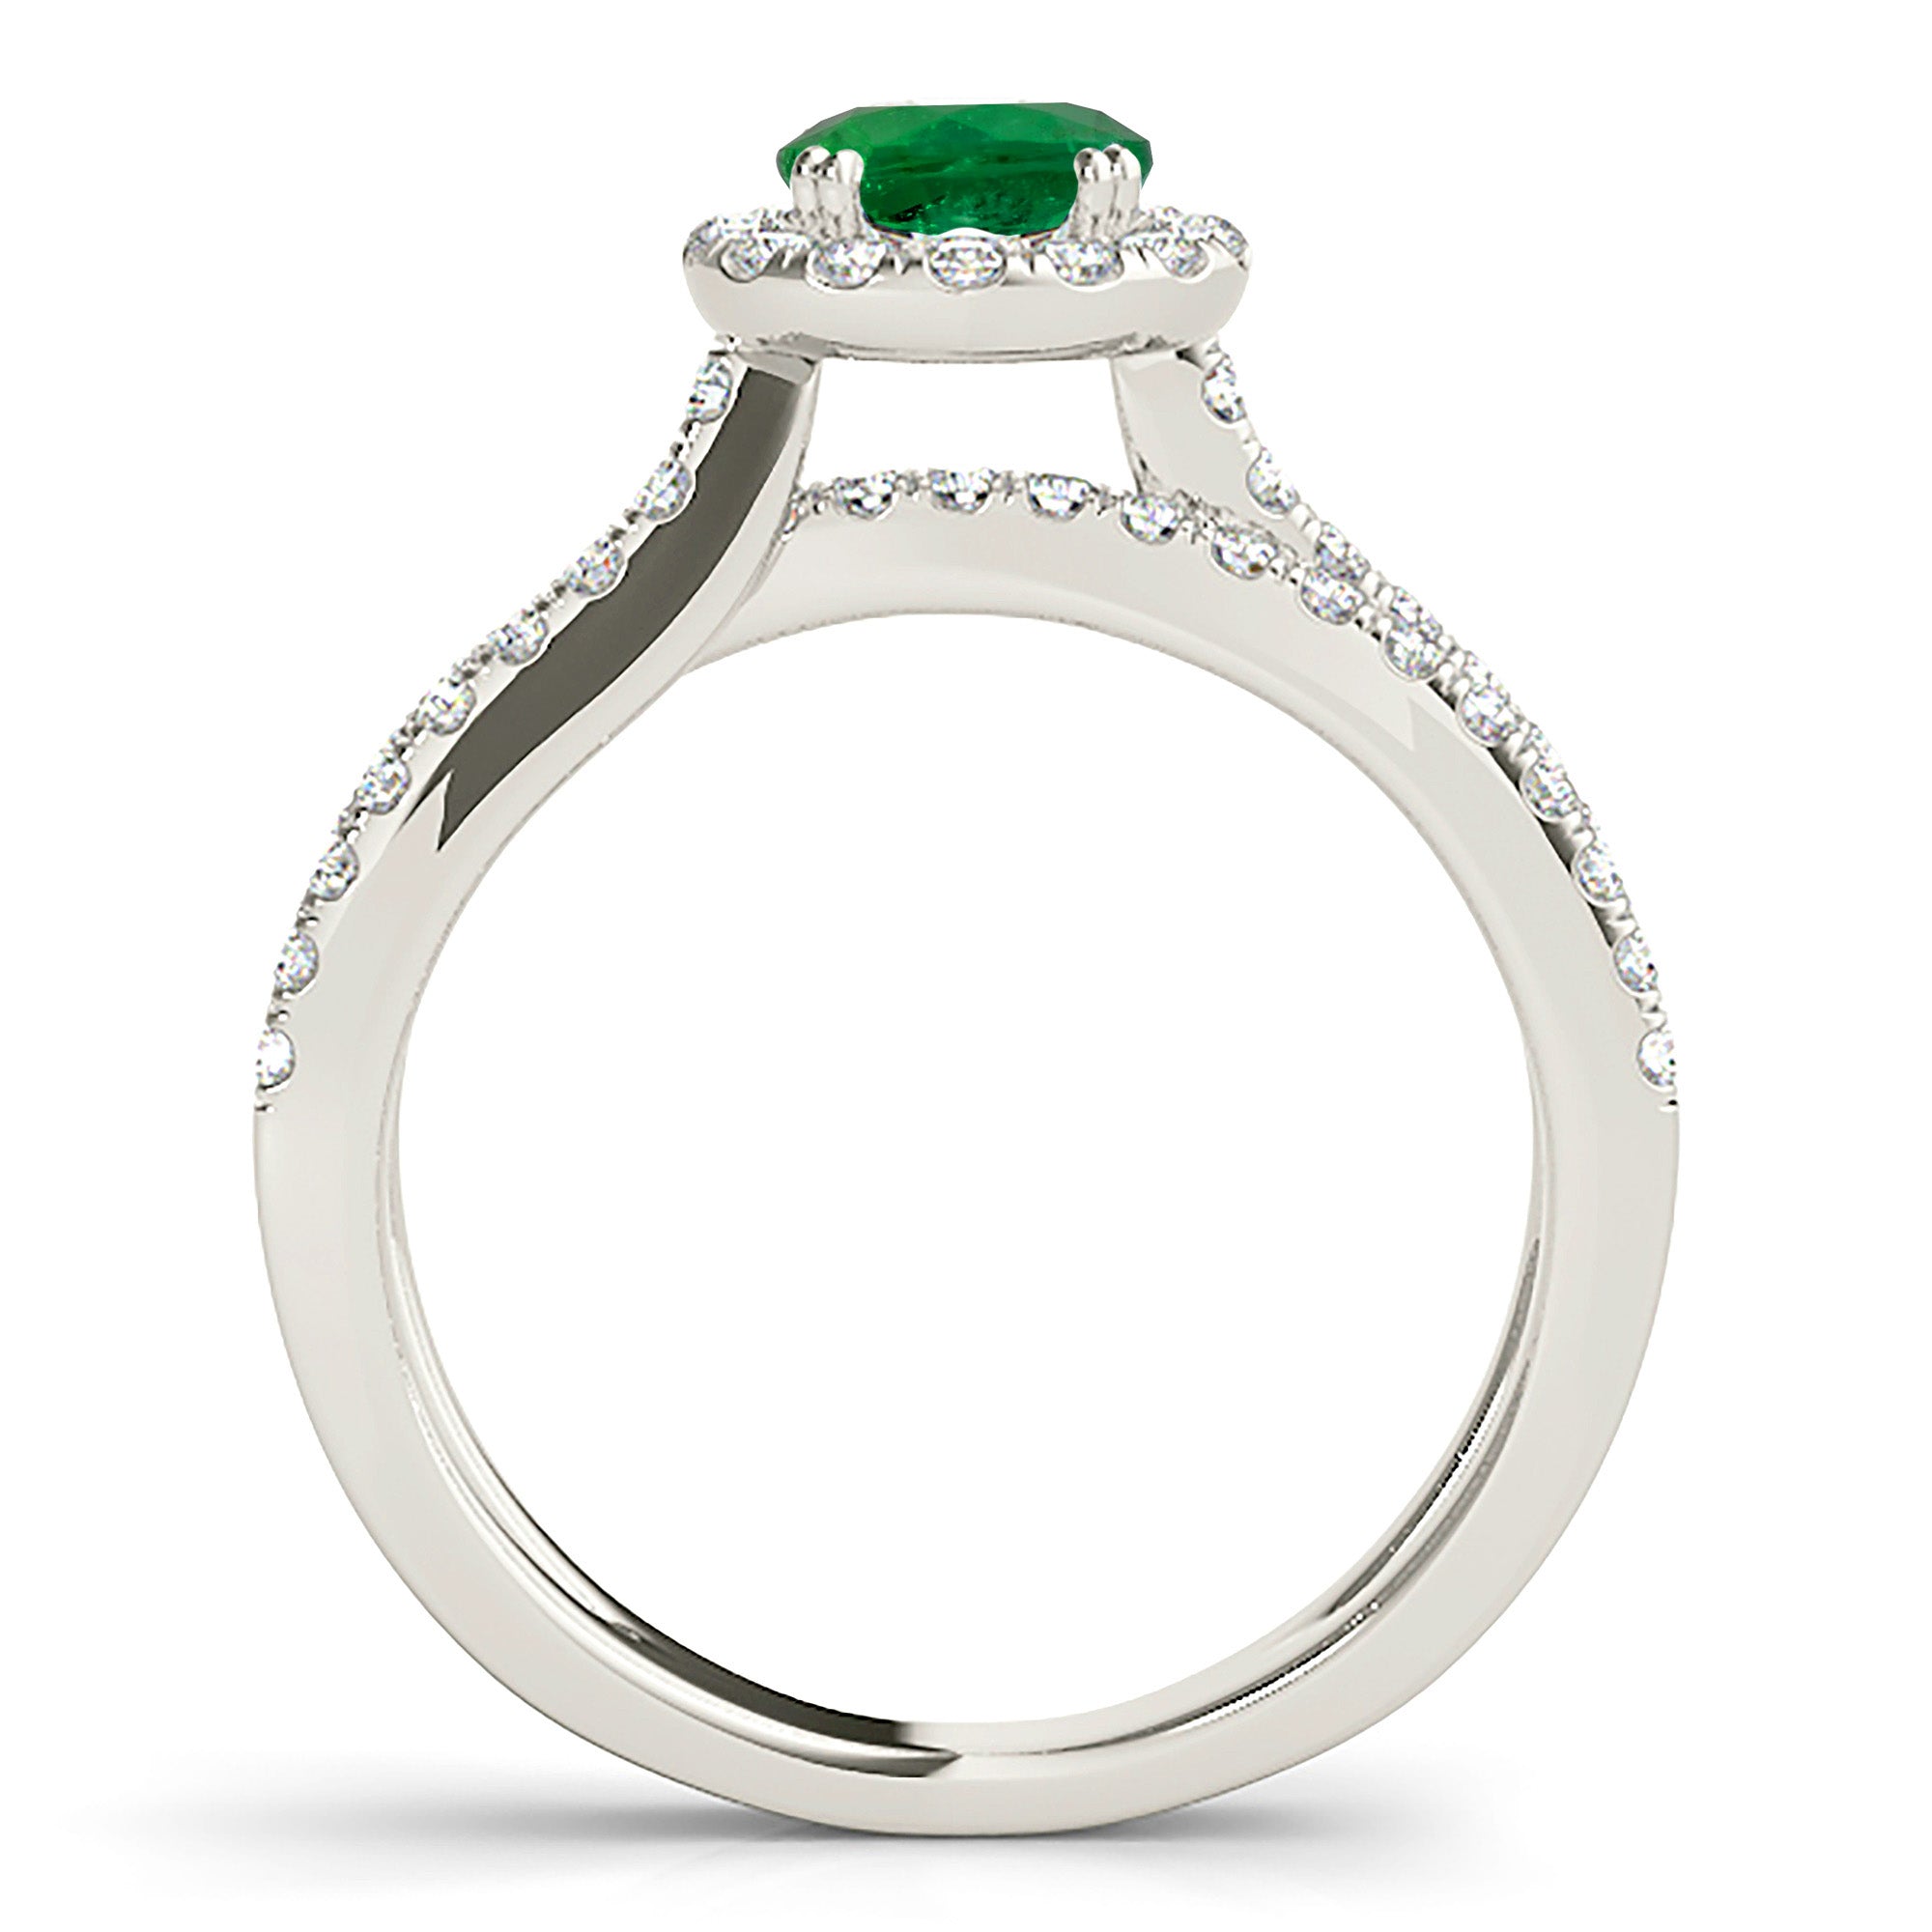 1.14 ct. Genuine Emerald Ring With 0.50 ctw. Diamond Halo And Wide Split Shank-in 14K/18K White, Yellow, Rose Gold and Platinum - Christmas Jewelry Gift -VIRABYANI